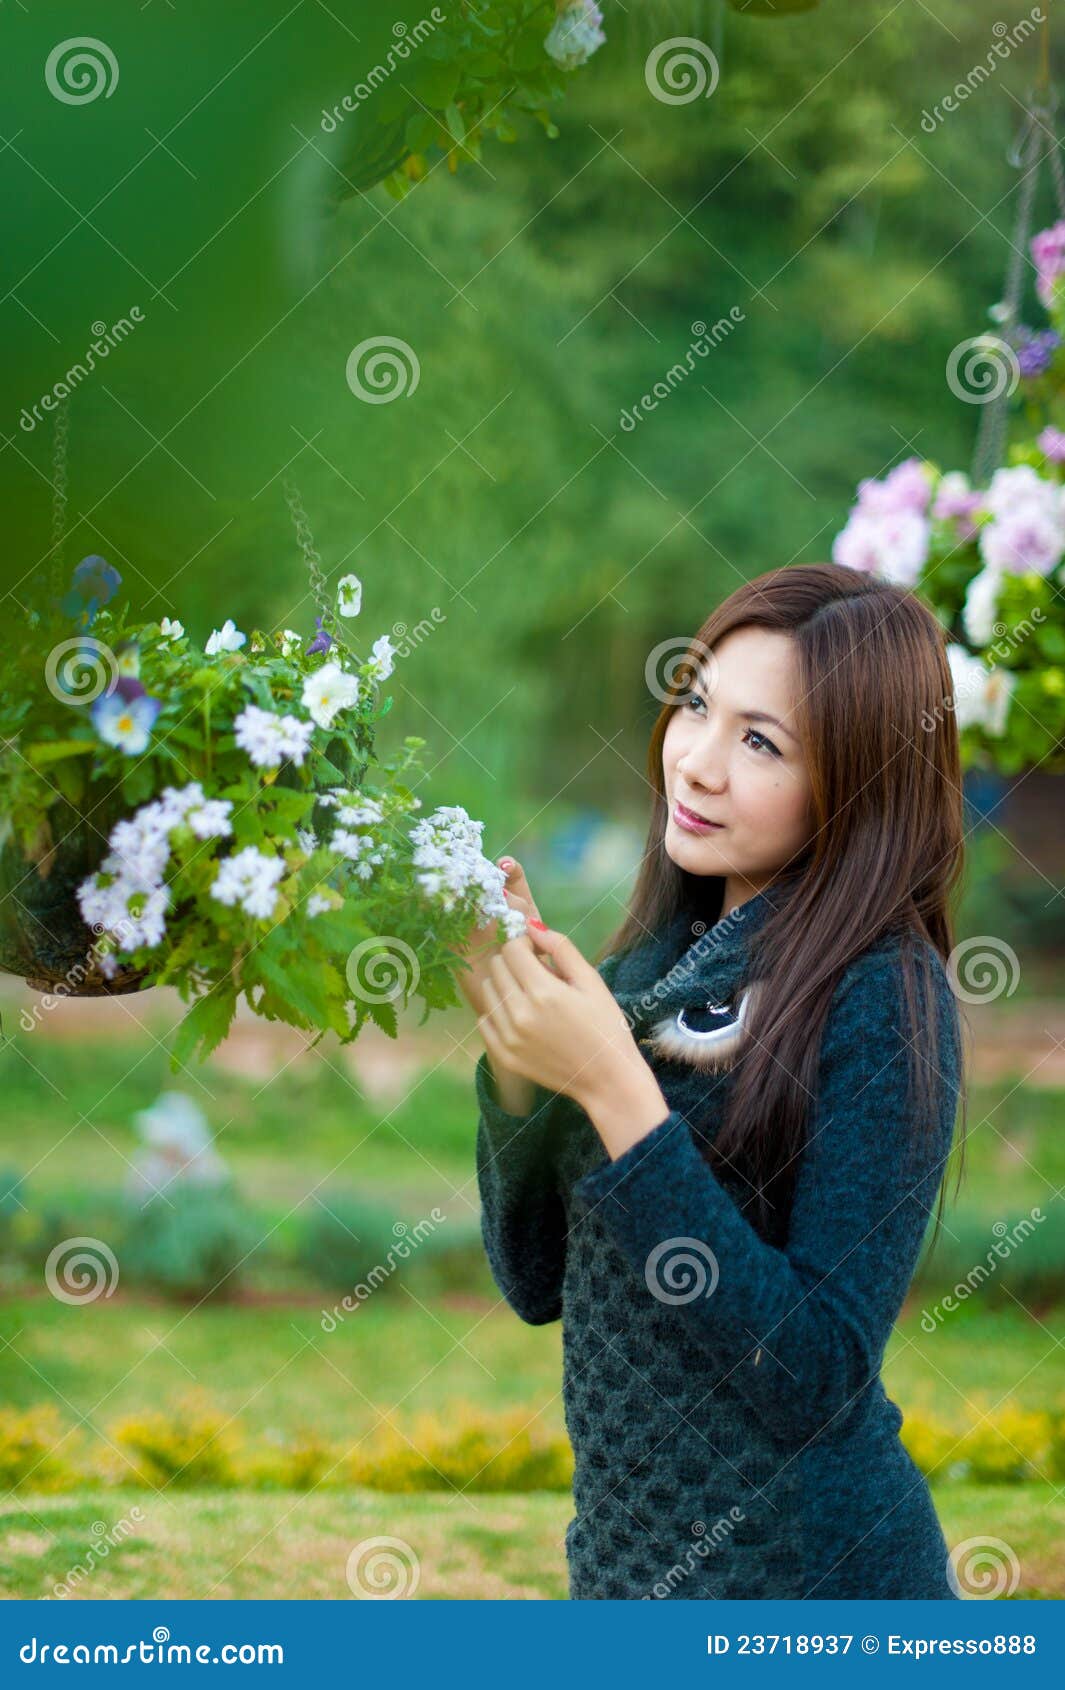 Beautiful South Asian Girl And Flowers Stock Image Image